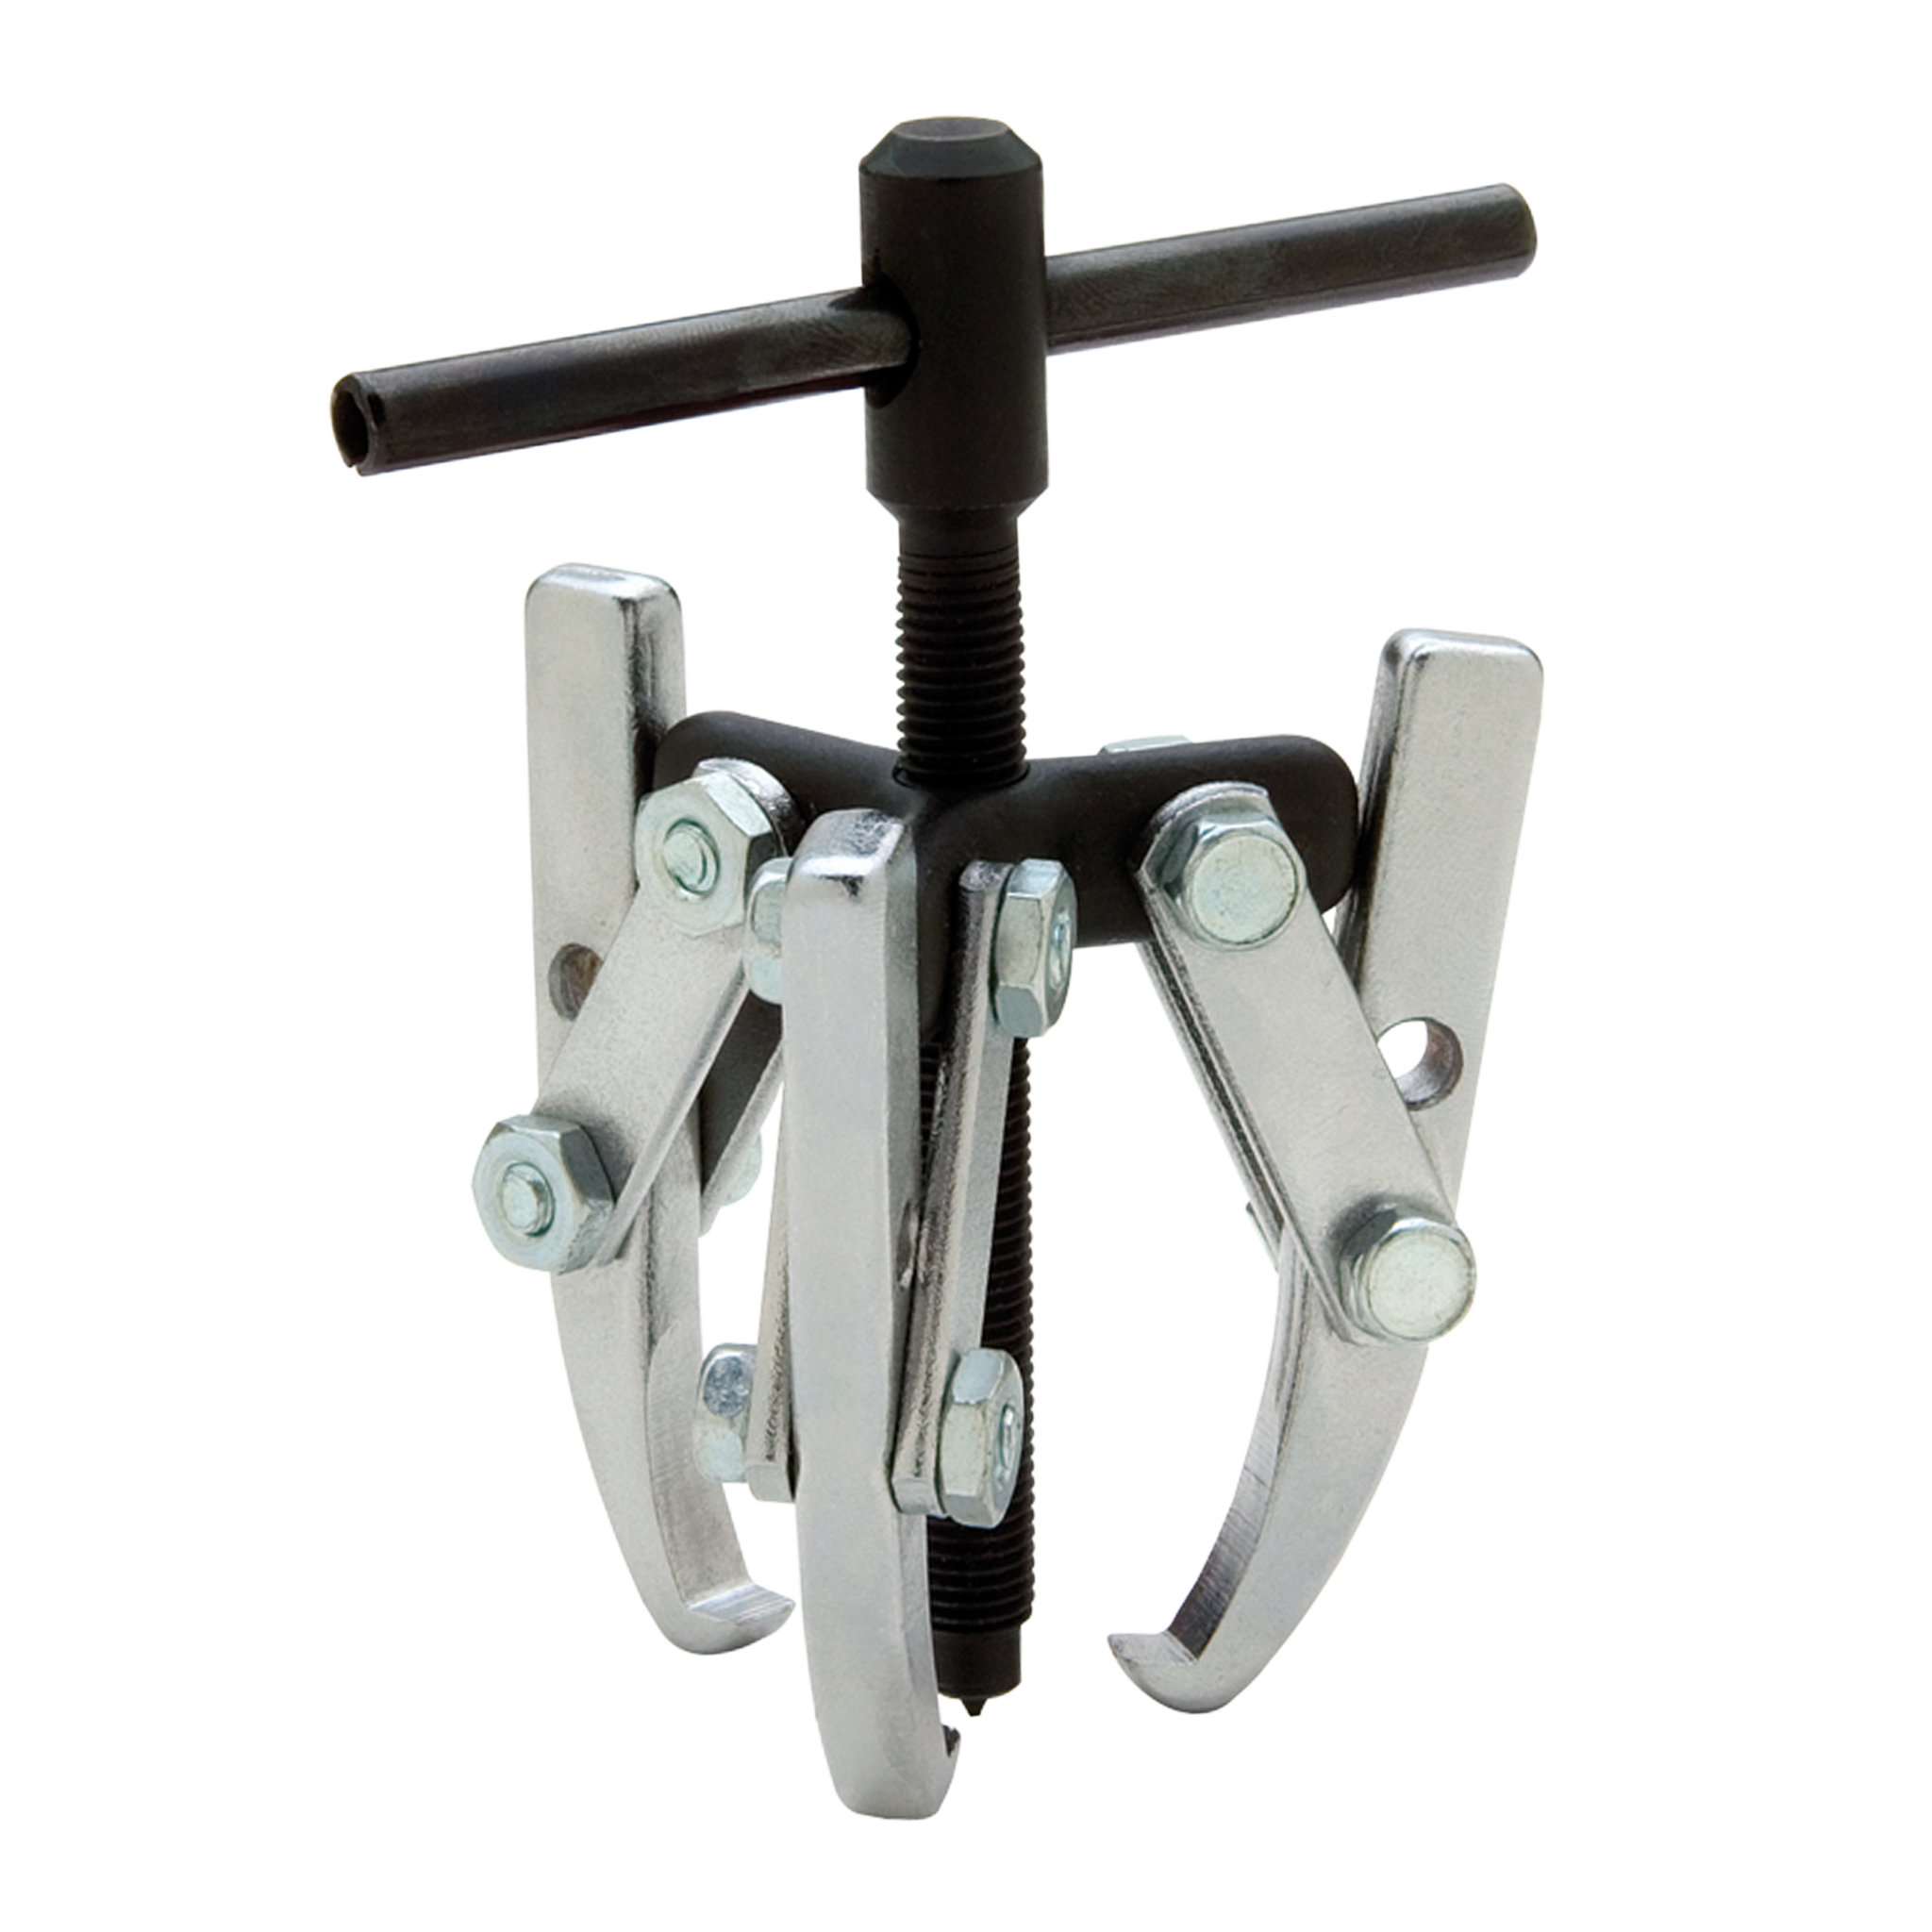 1 Ton Capacity, Adjustable 3 Jaw Puller